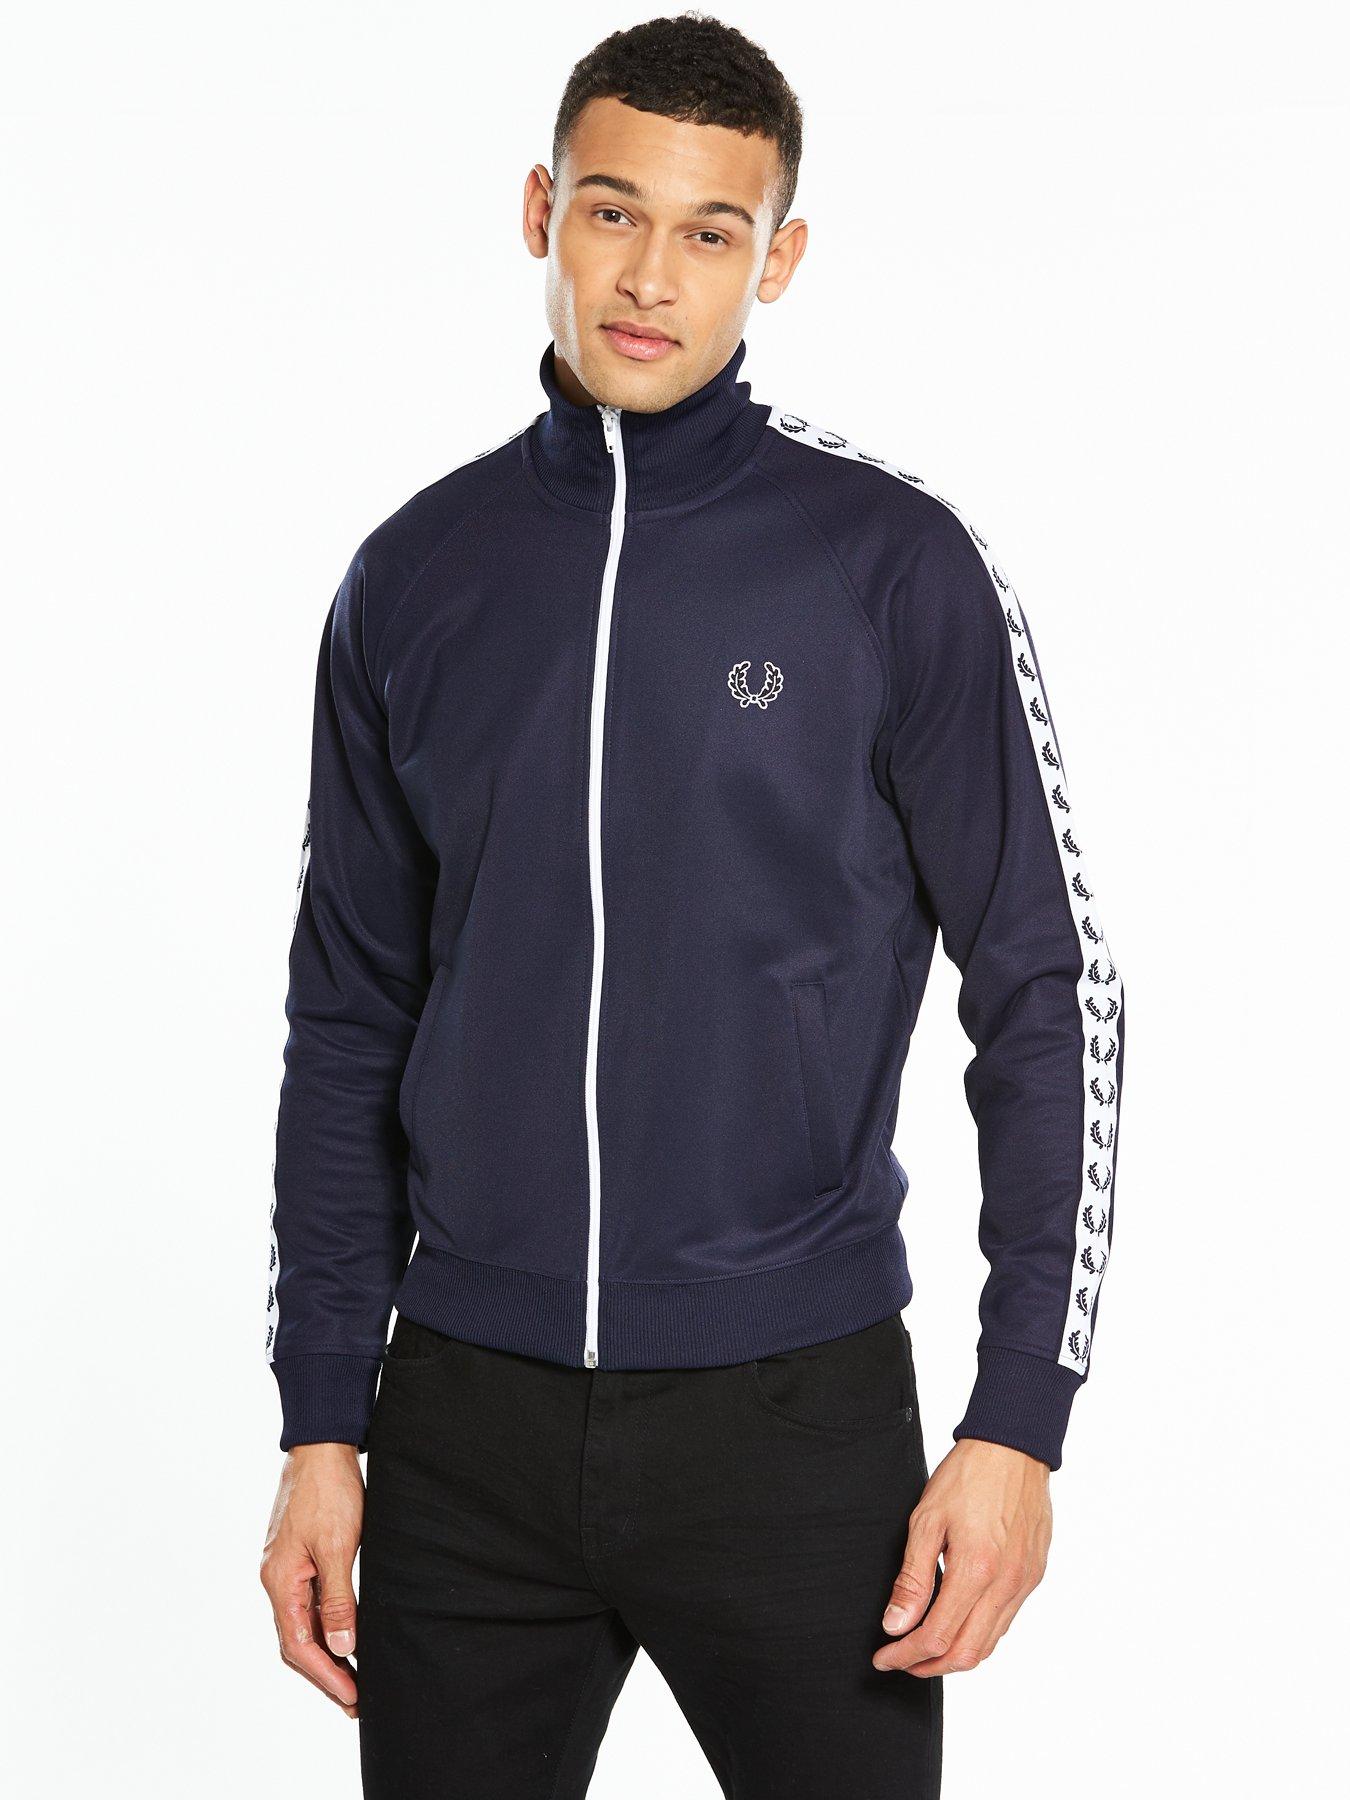 taped track jacket fred perry